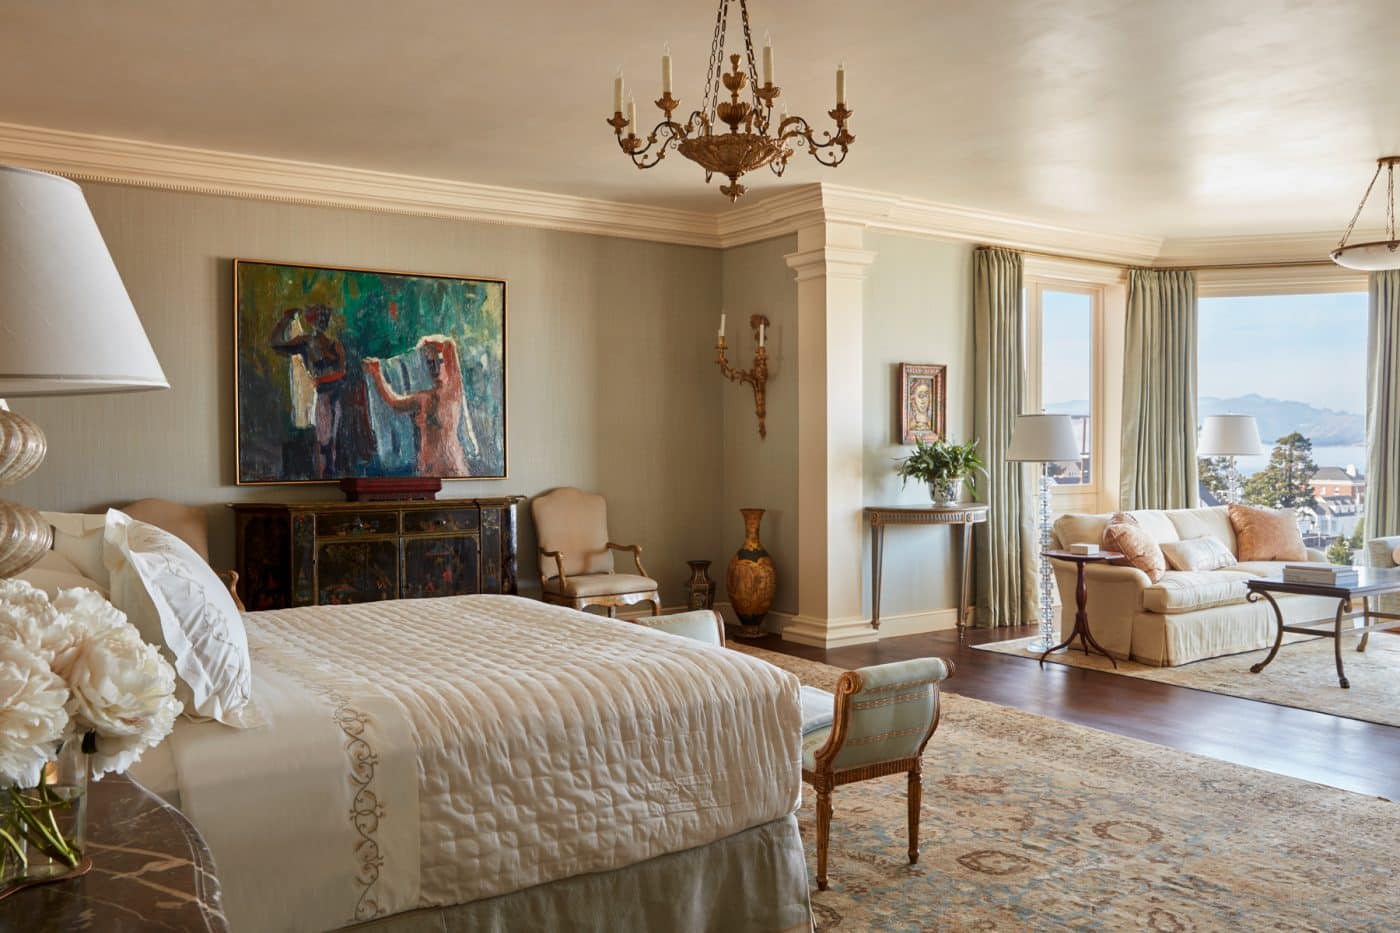 San Francisco neoclassical mansion sitting room by interior designer Suzanne Tucker with David Park abstract painting